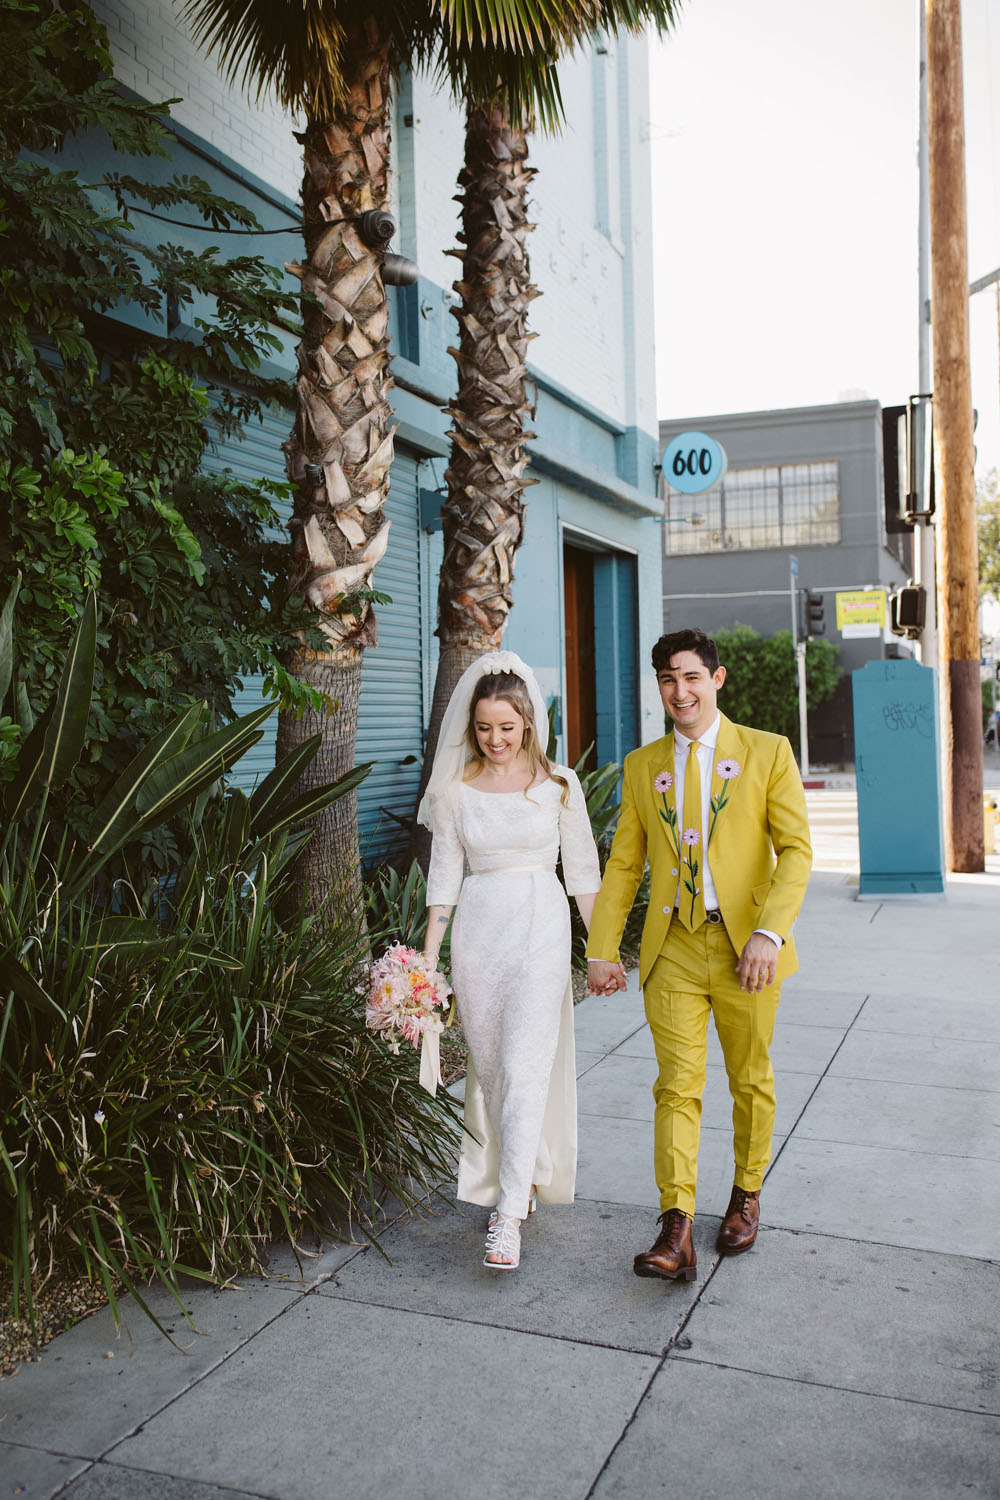 1960s inspired retro wedding portraits with groom in yellow floral suit